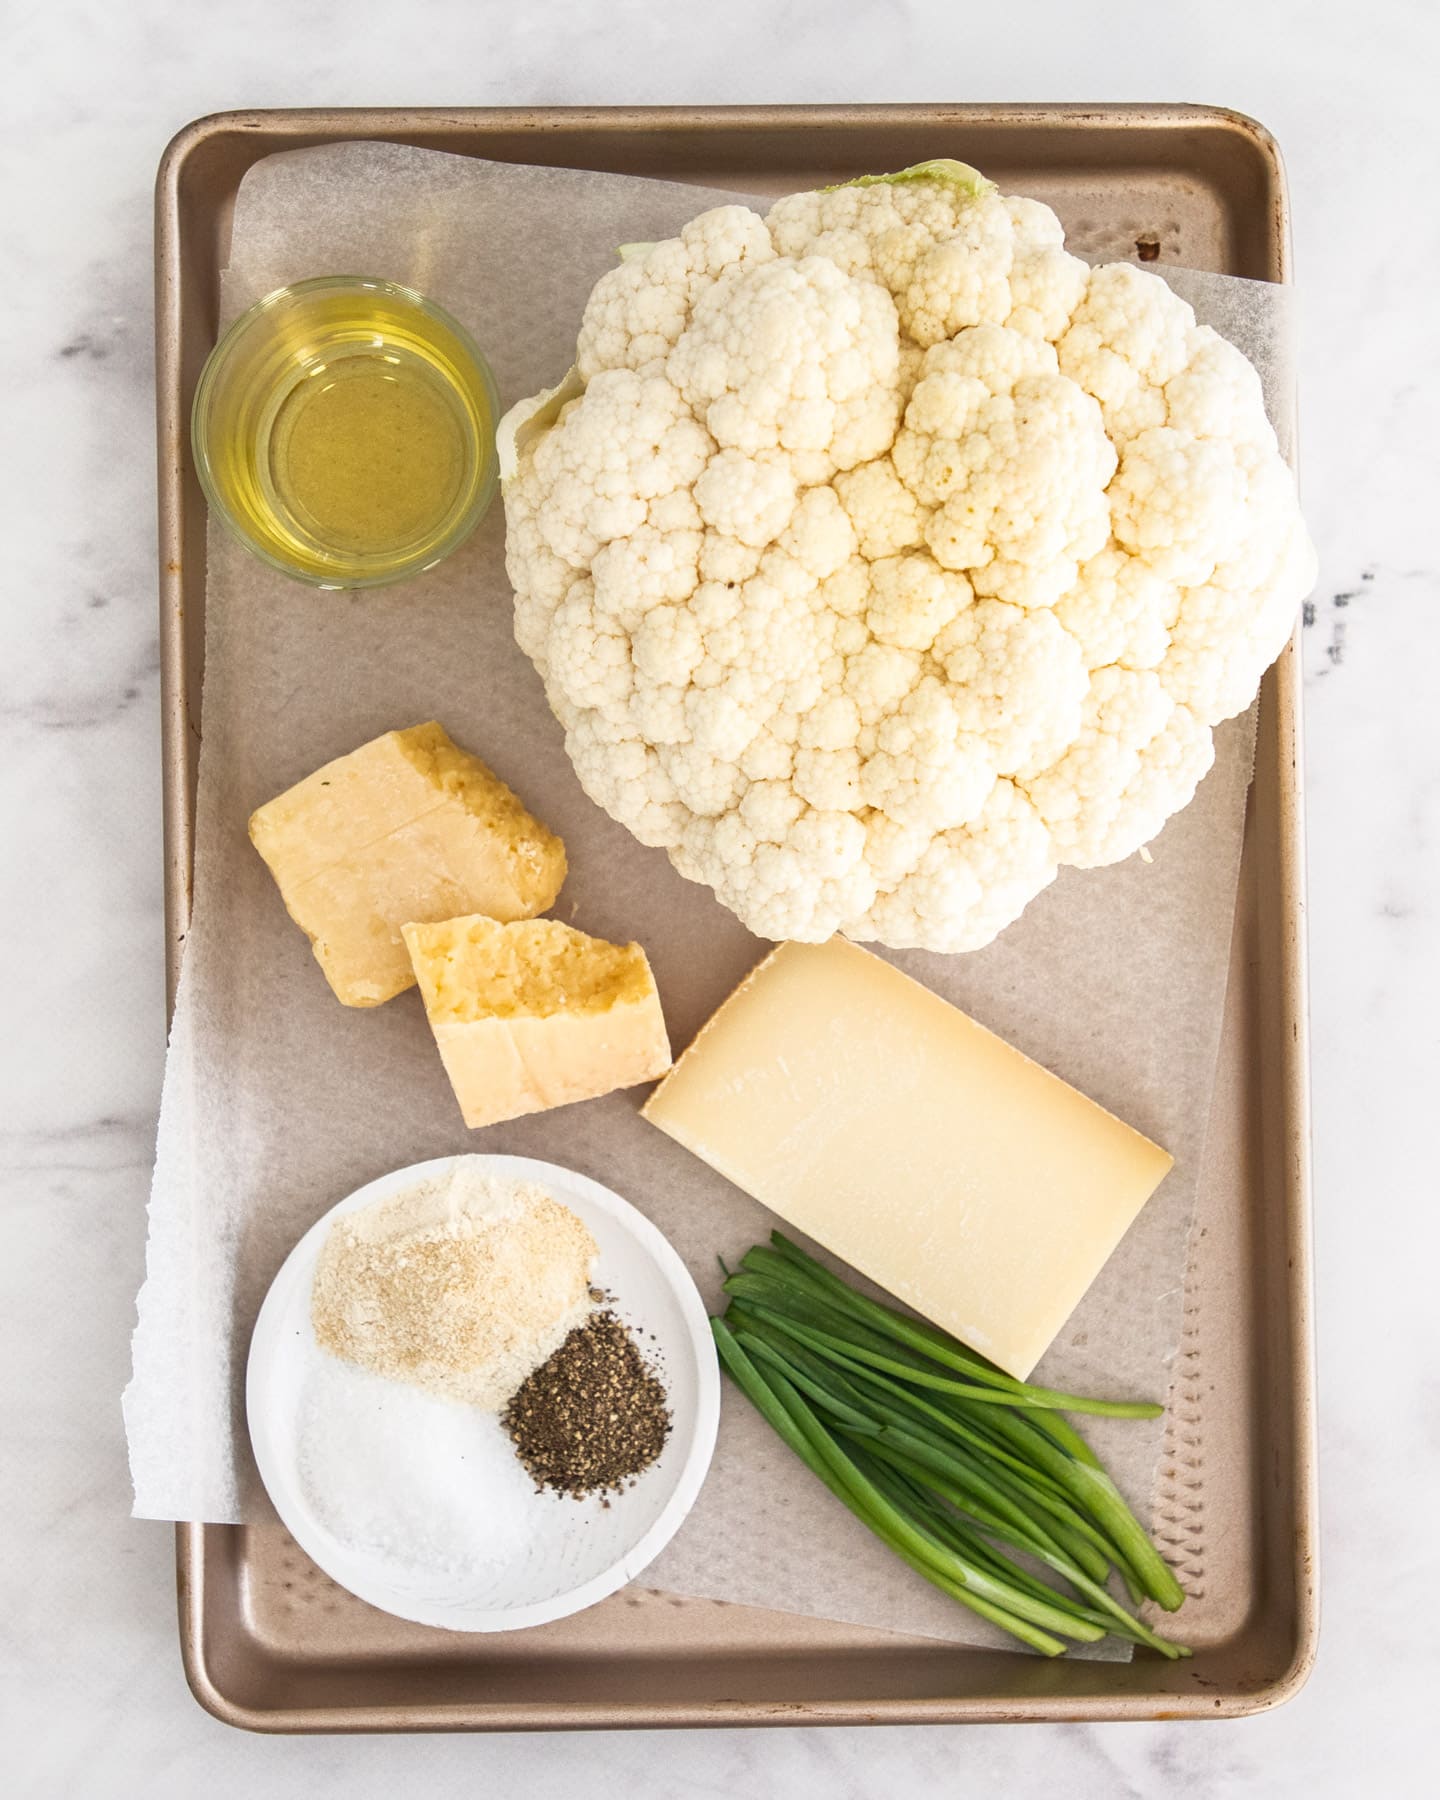 Ingredients for cheesy cauliflower steaks on a baking tray.